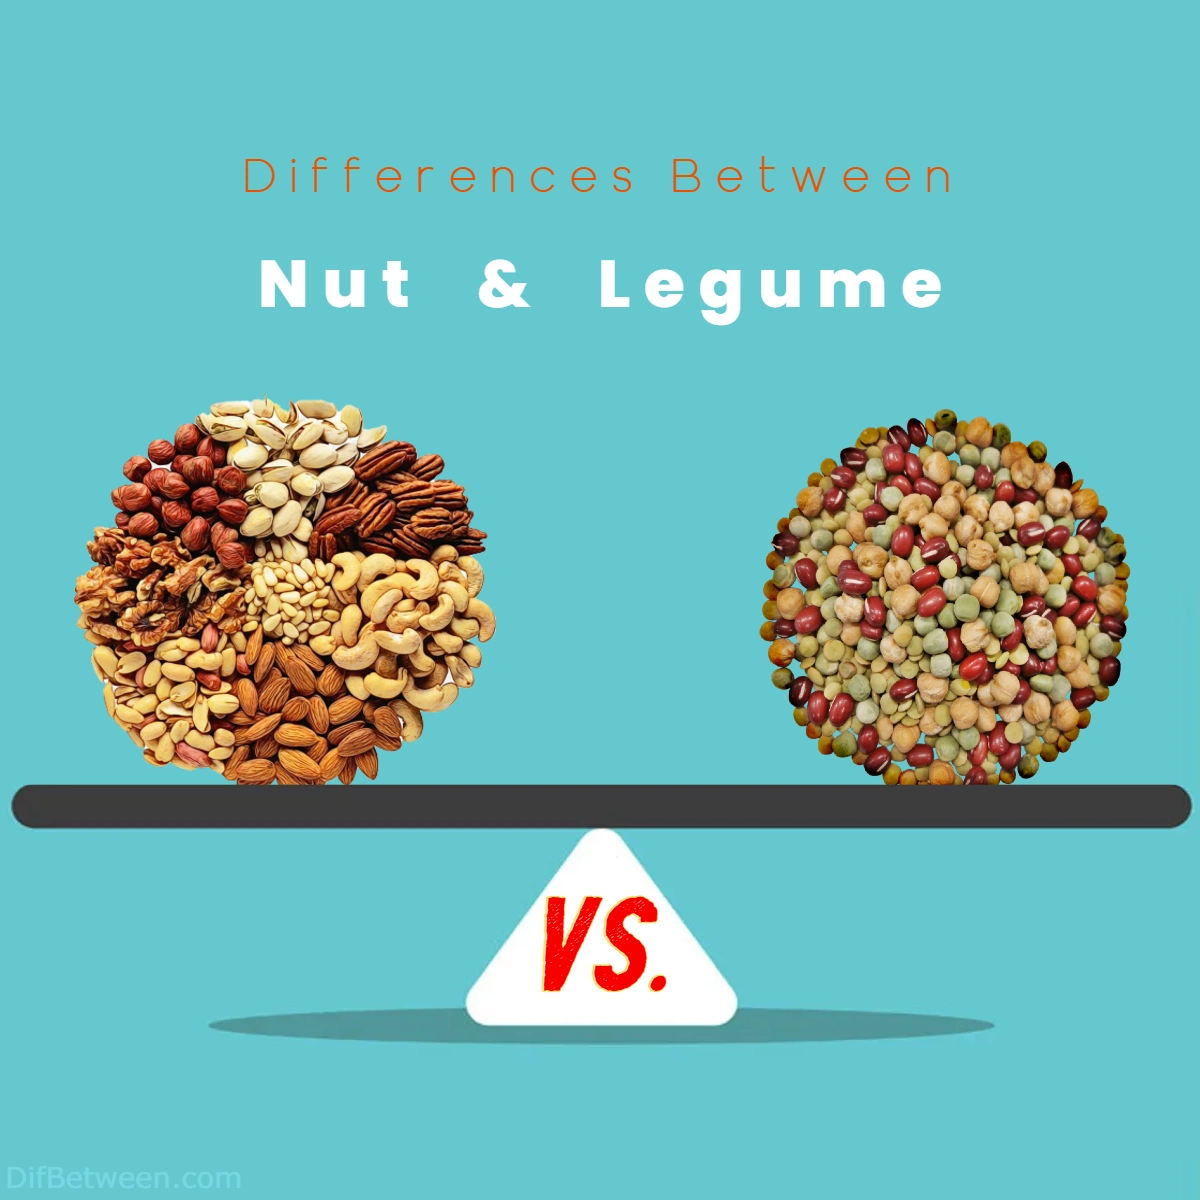 Differences Between Nut and Legume